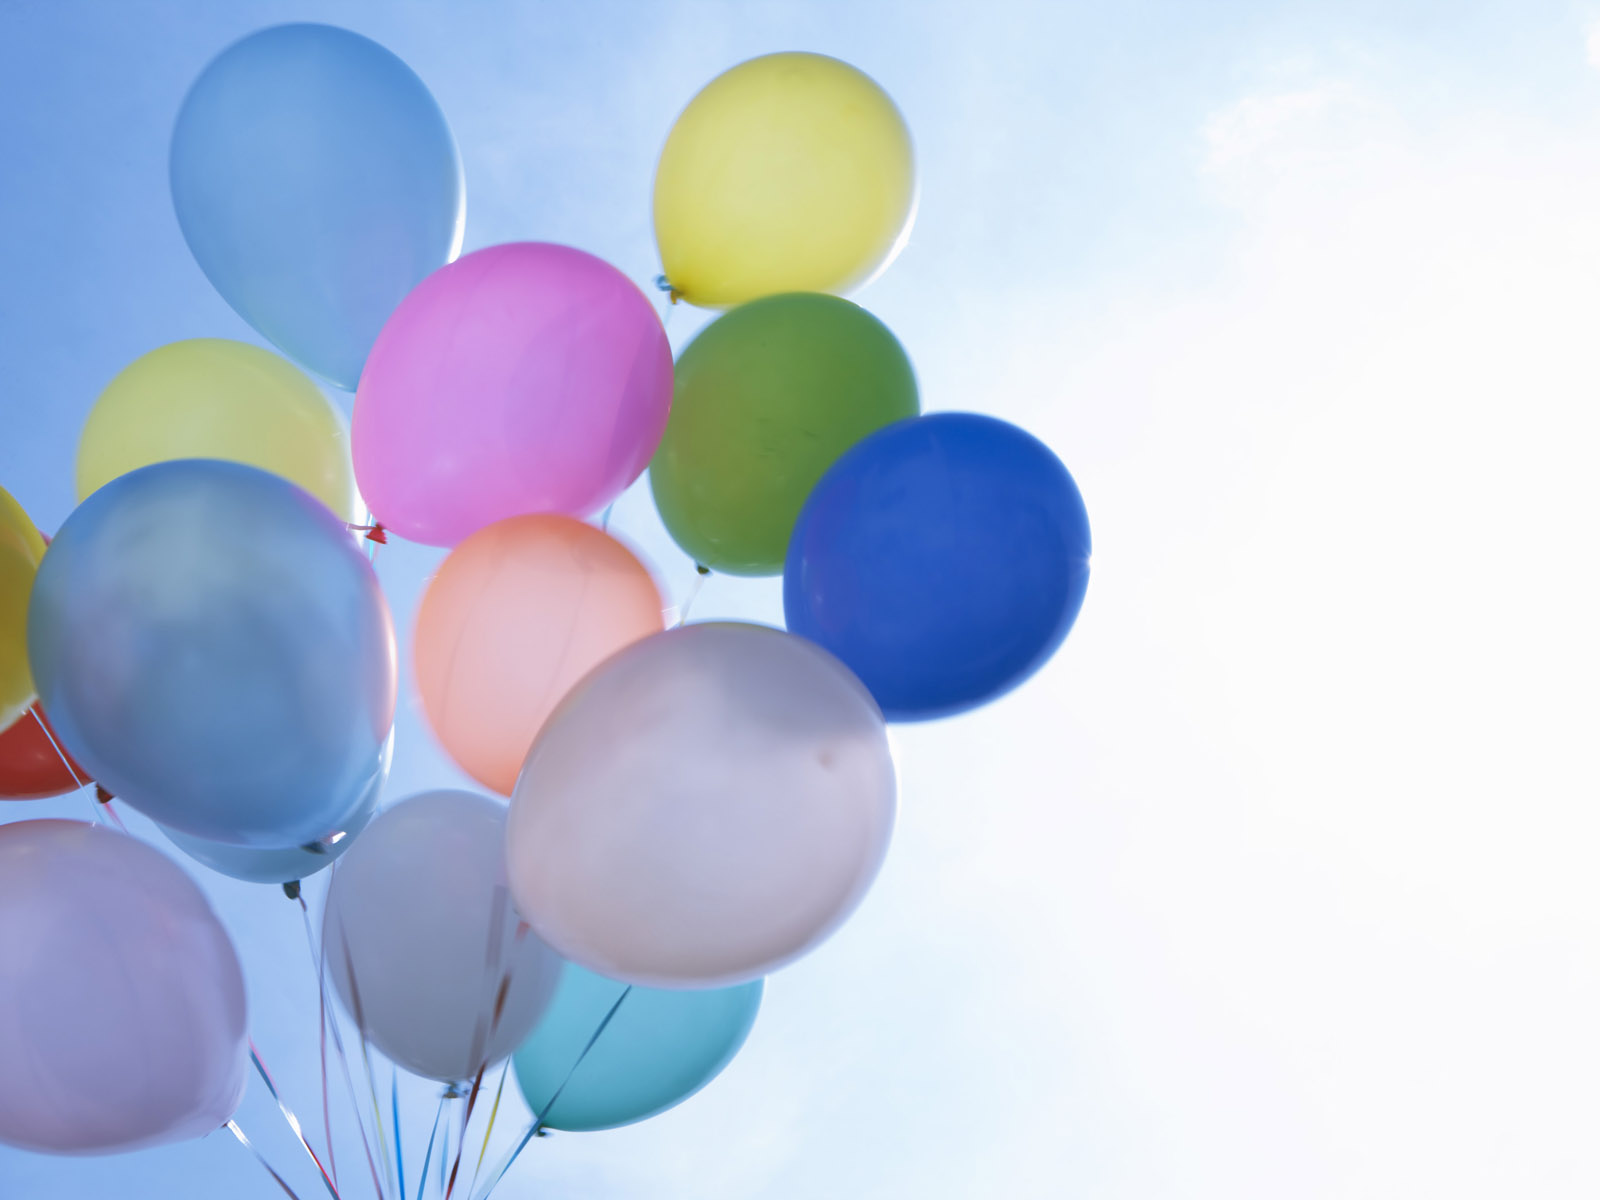  Birthday  balloon  backgrounds  Tops Wallpapers  Gallery